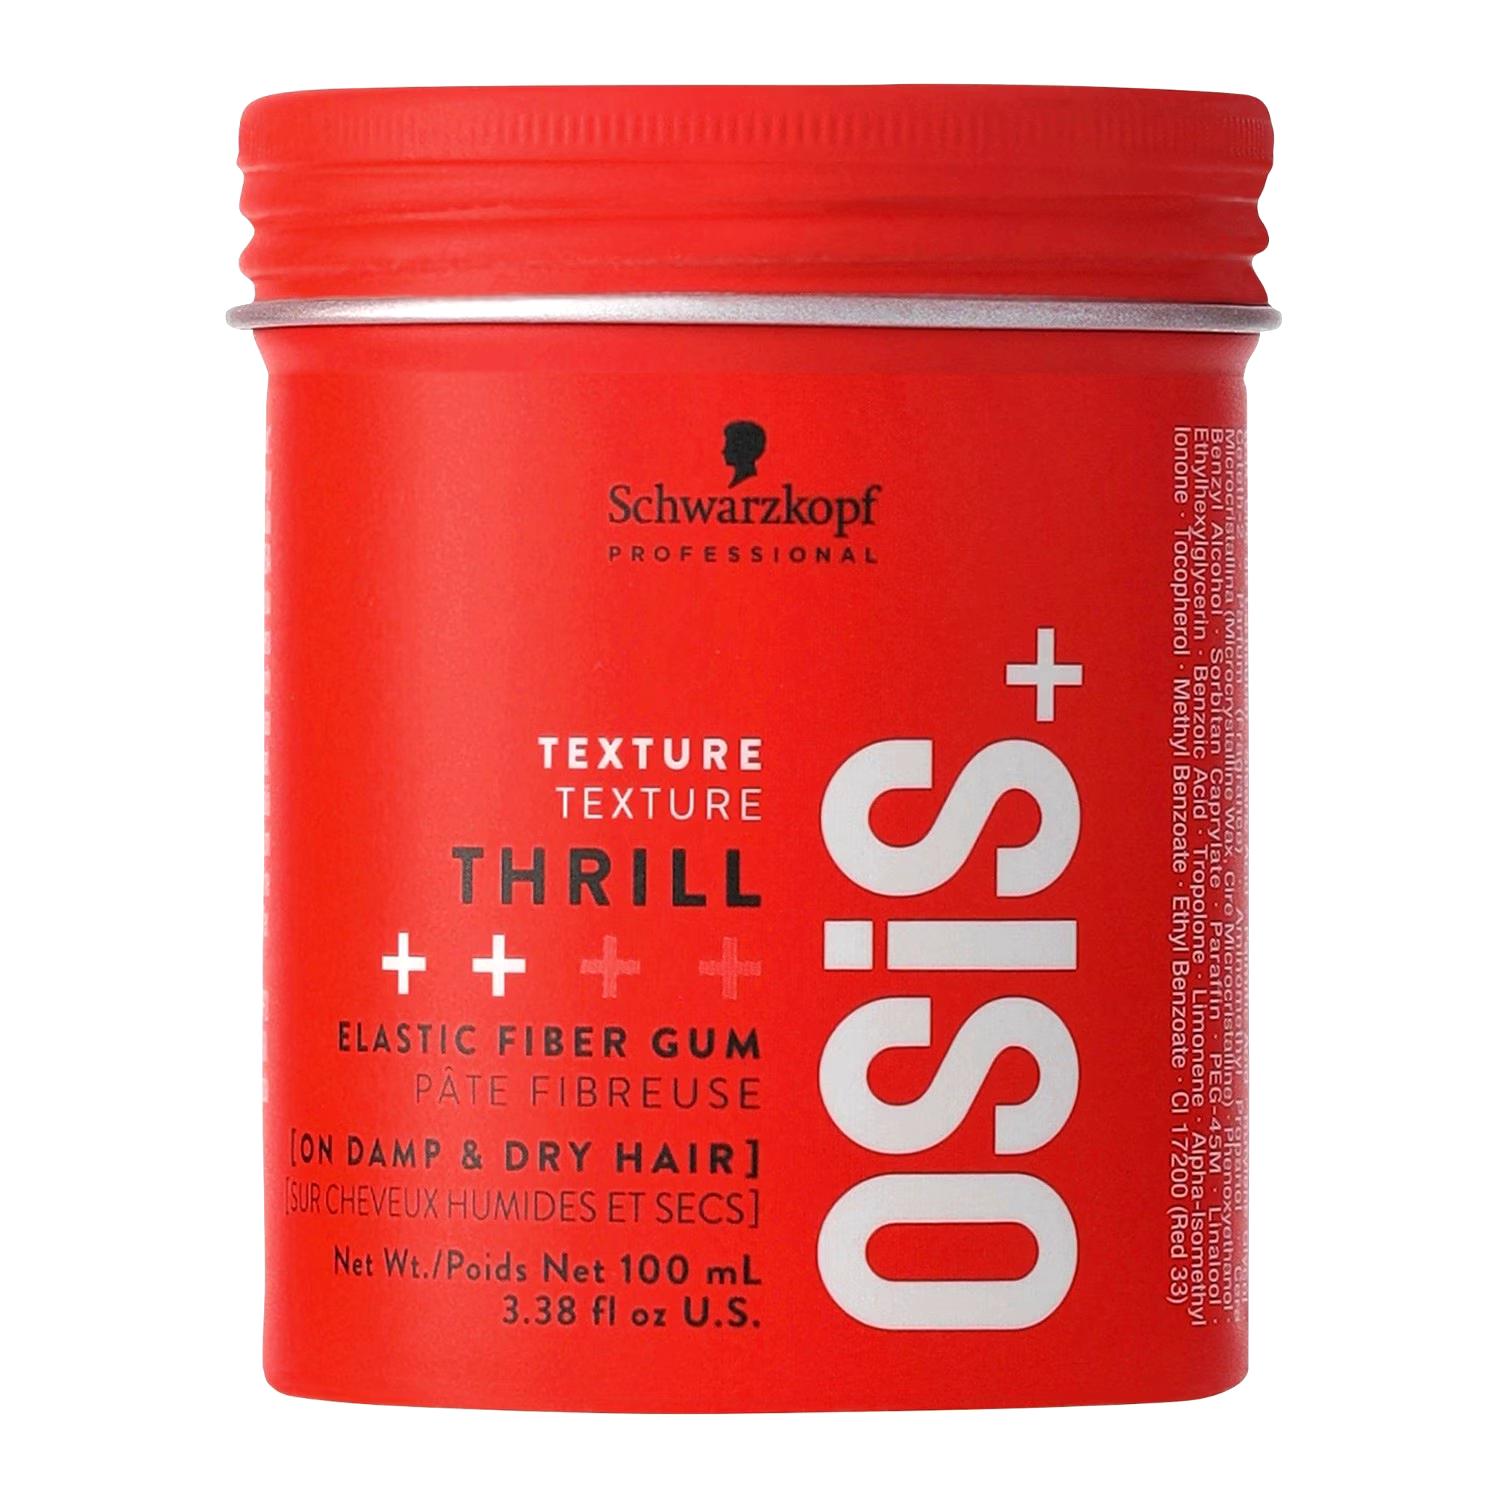 OSIS+ Texture Thrill